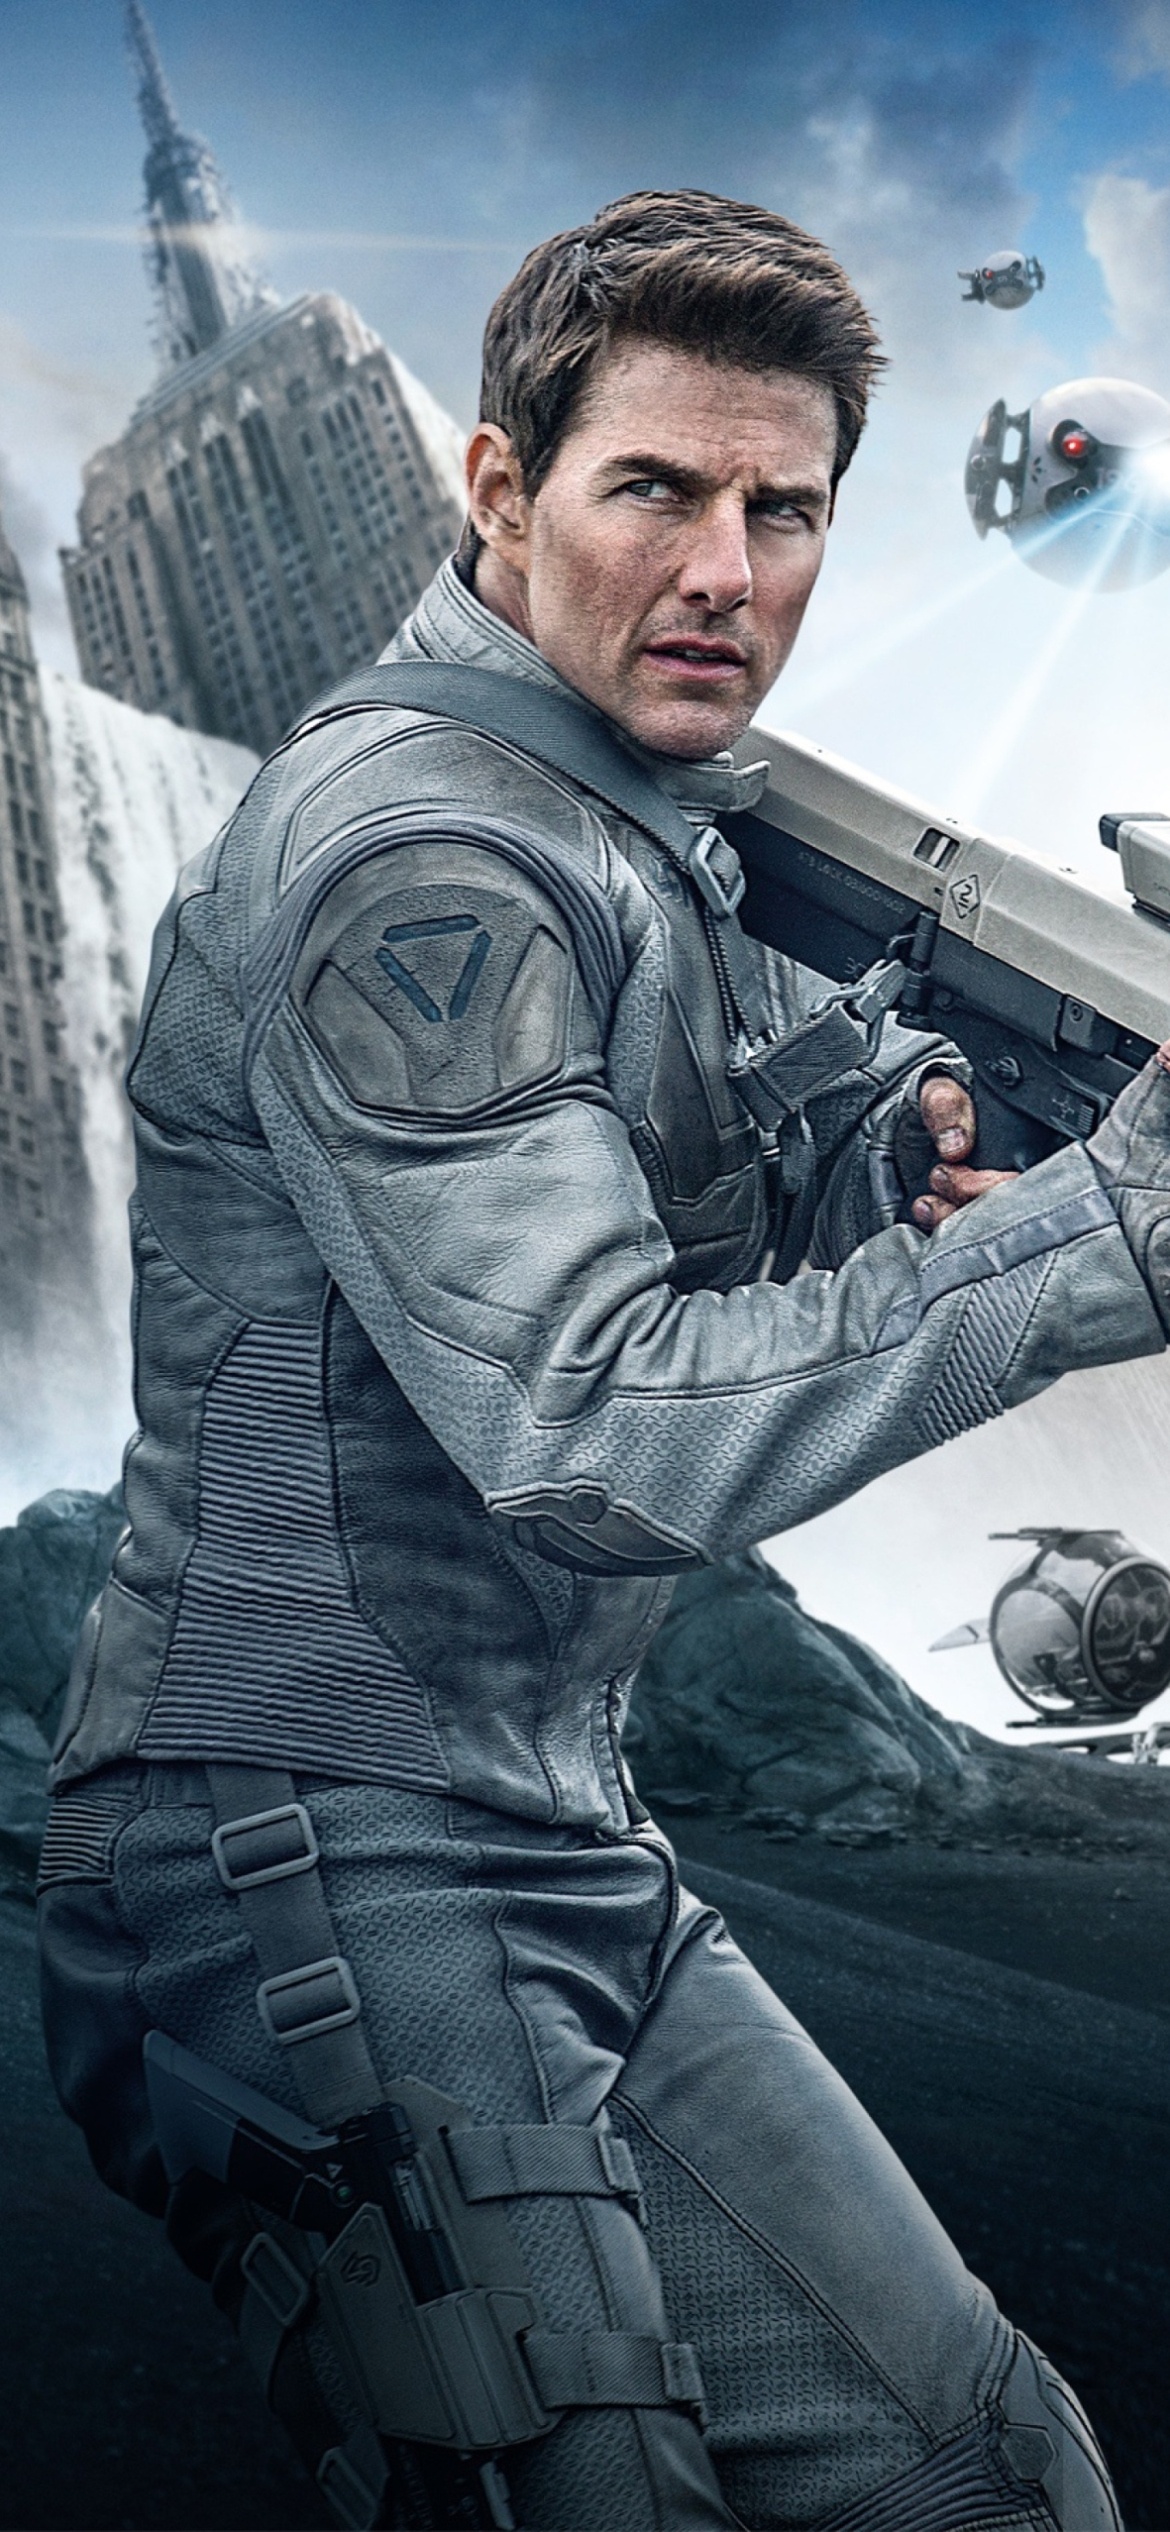 Tom Cruise, iPhone wallpaper, Oblivion, Action-packed, 1170x2540 HD Handy